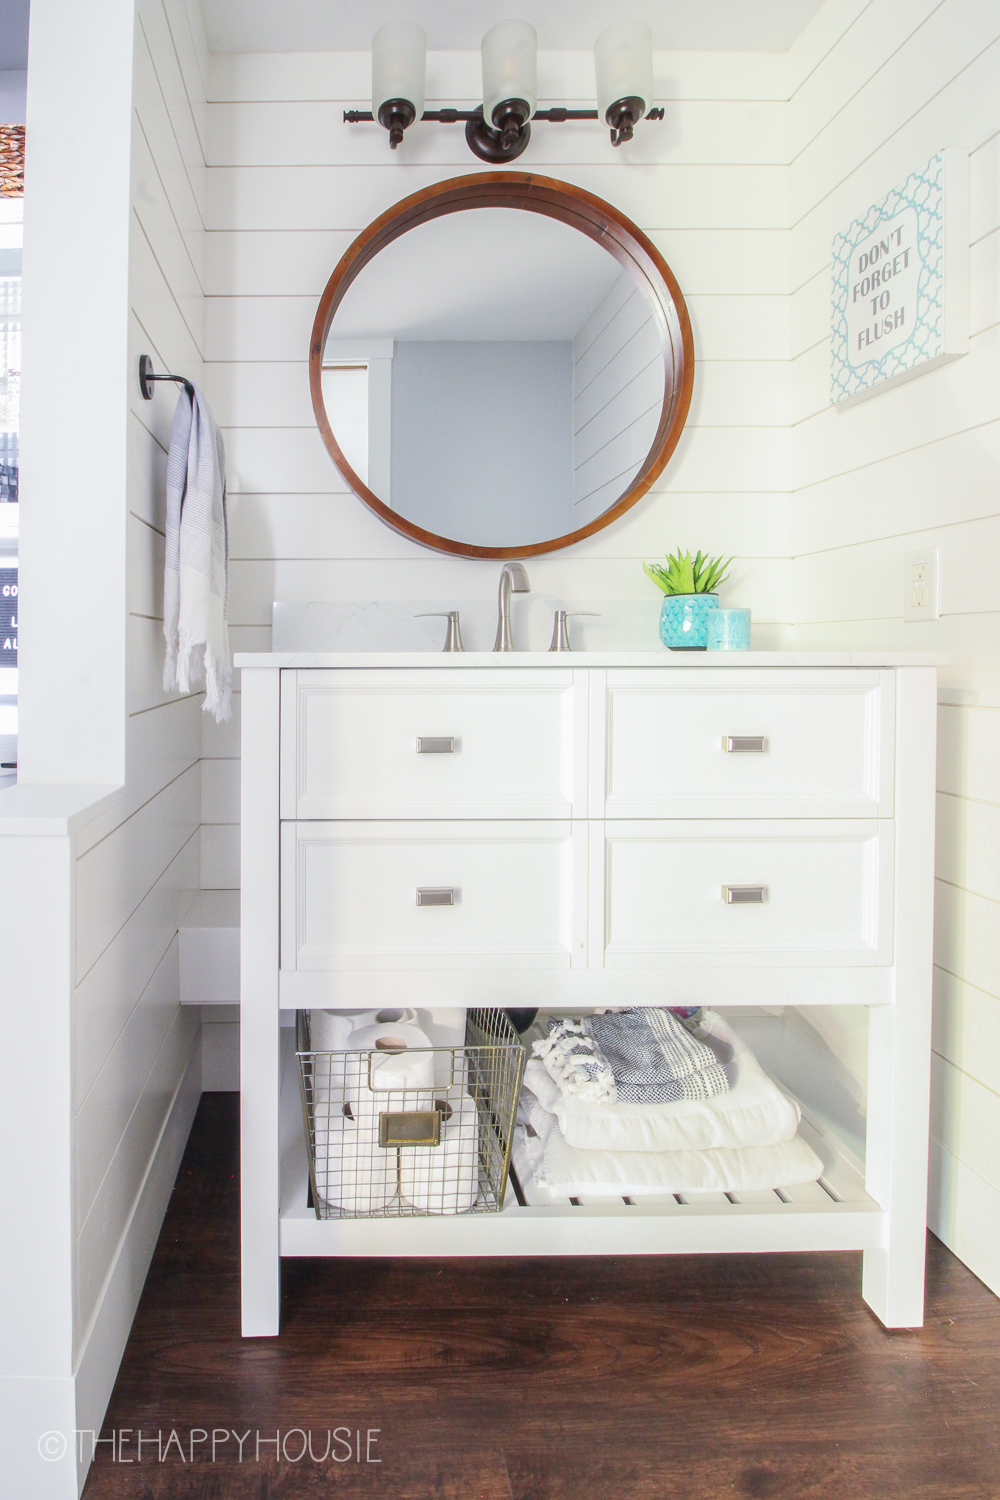 A white bathroom cabinet with towels underneath and lights just above the round mirror.